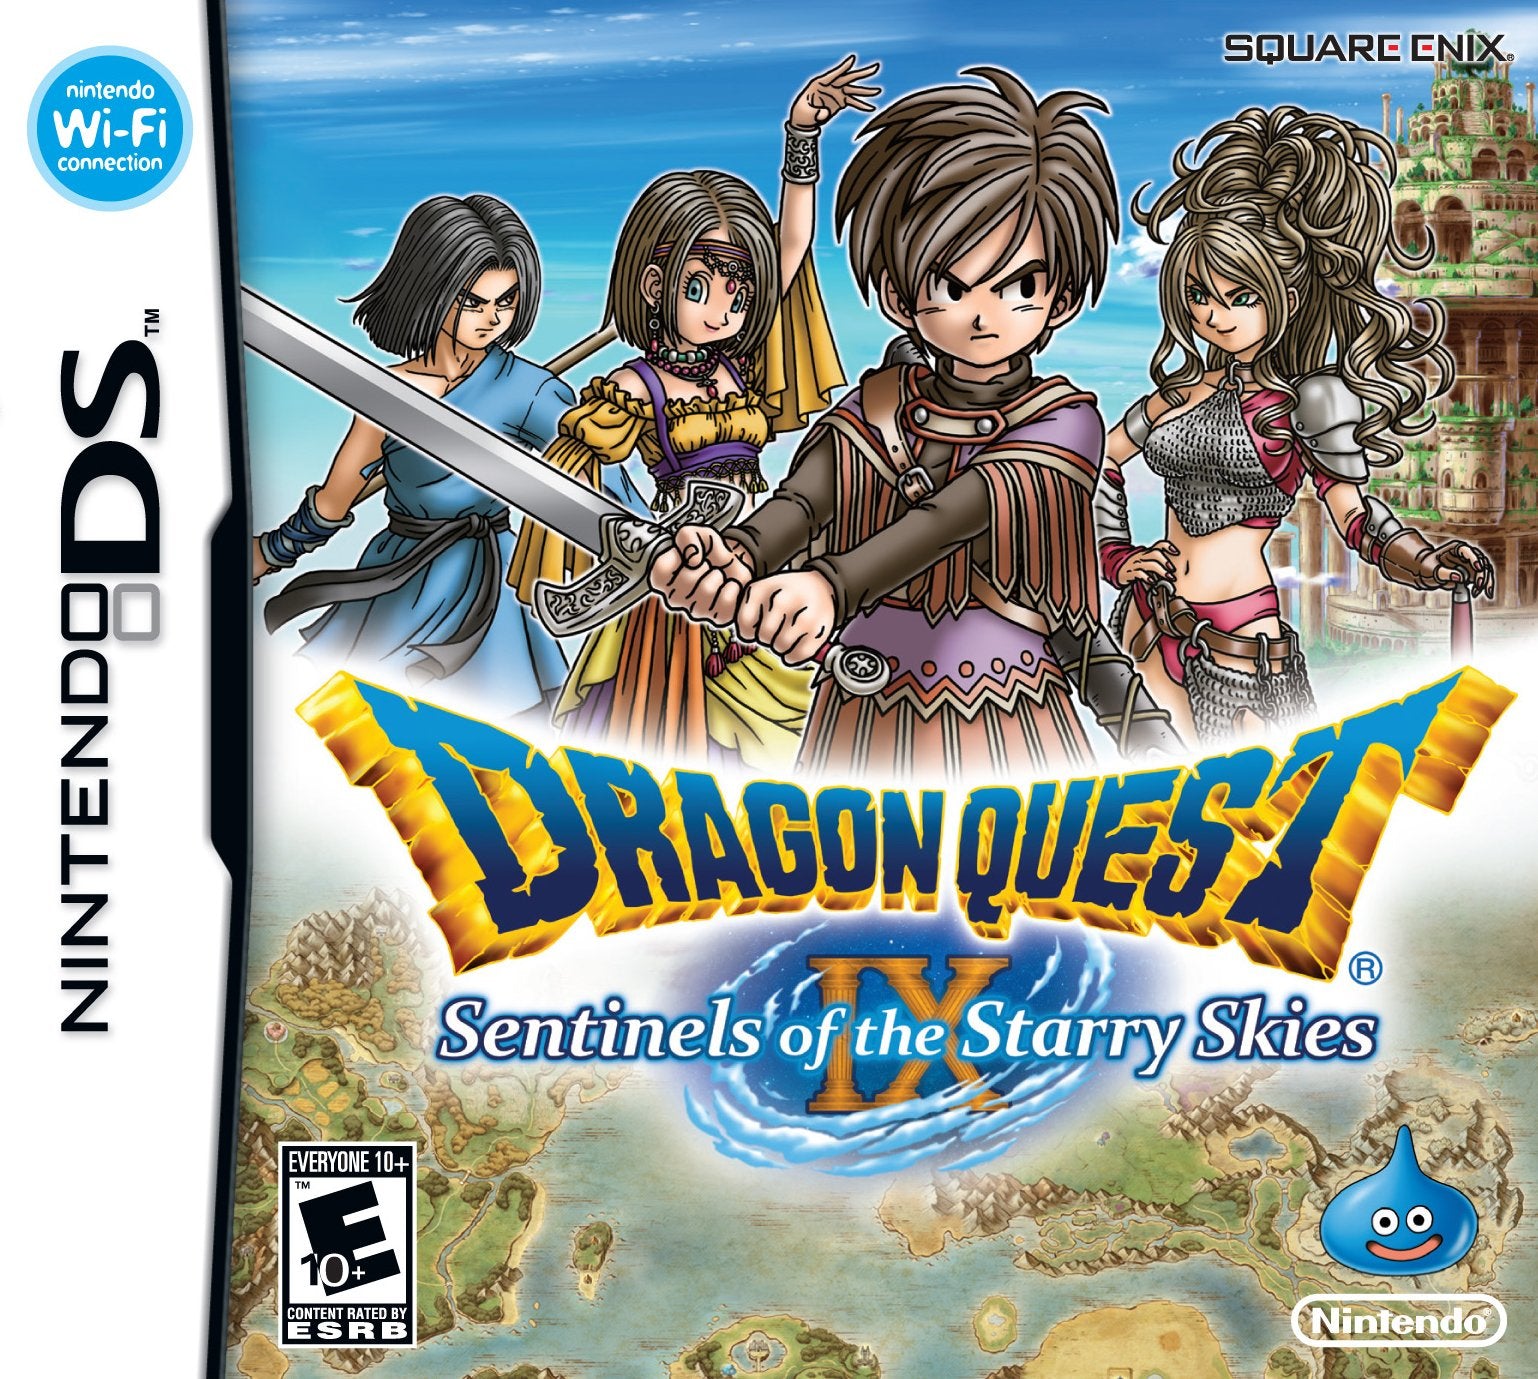 Game | Nintendo DS | Dragon Quest IX: Sentinels Of The Starry Skies